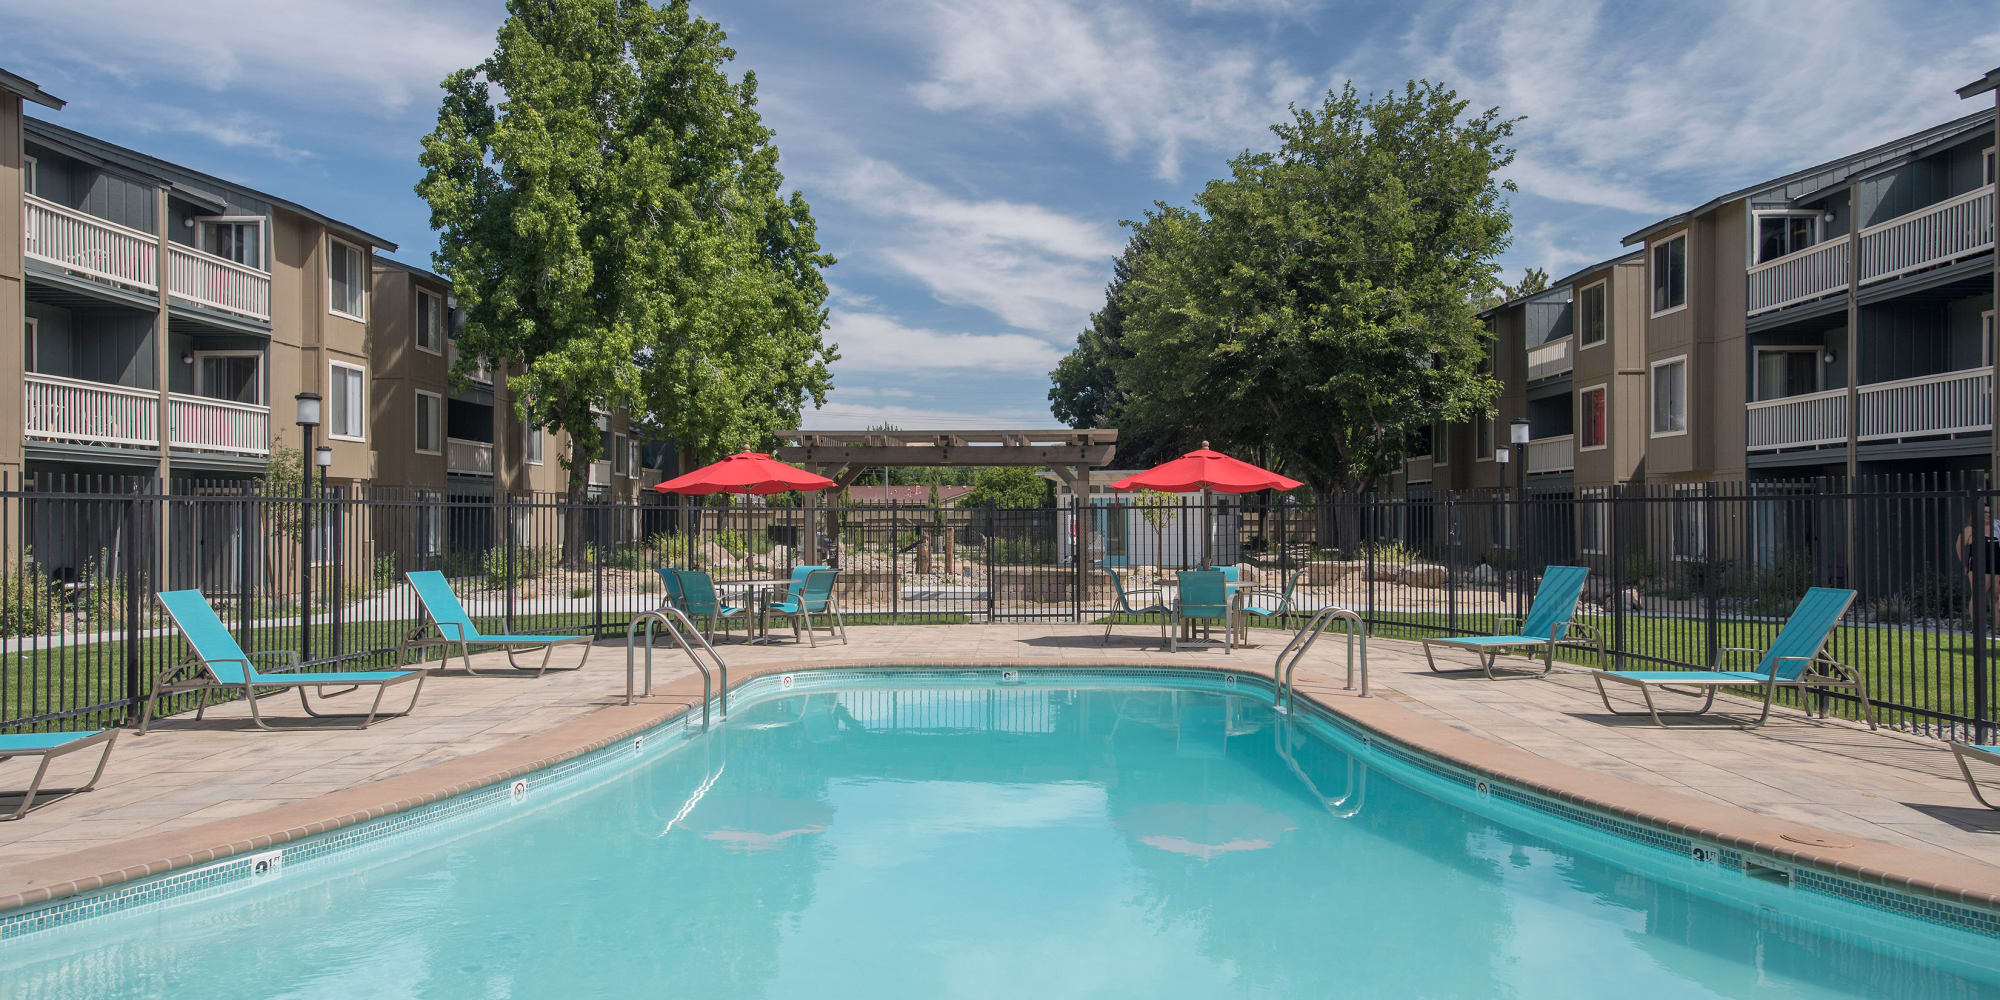 Swimming pool at Keyway Apartments in Sparks, Nevada